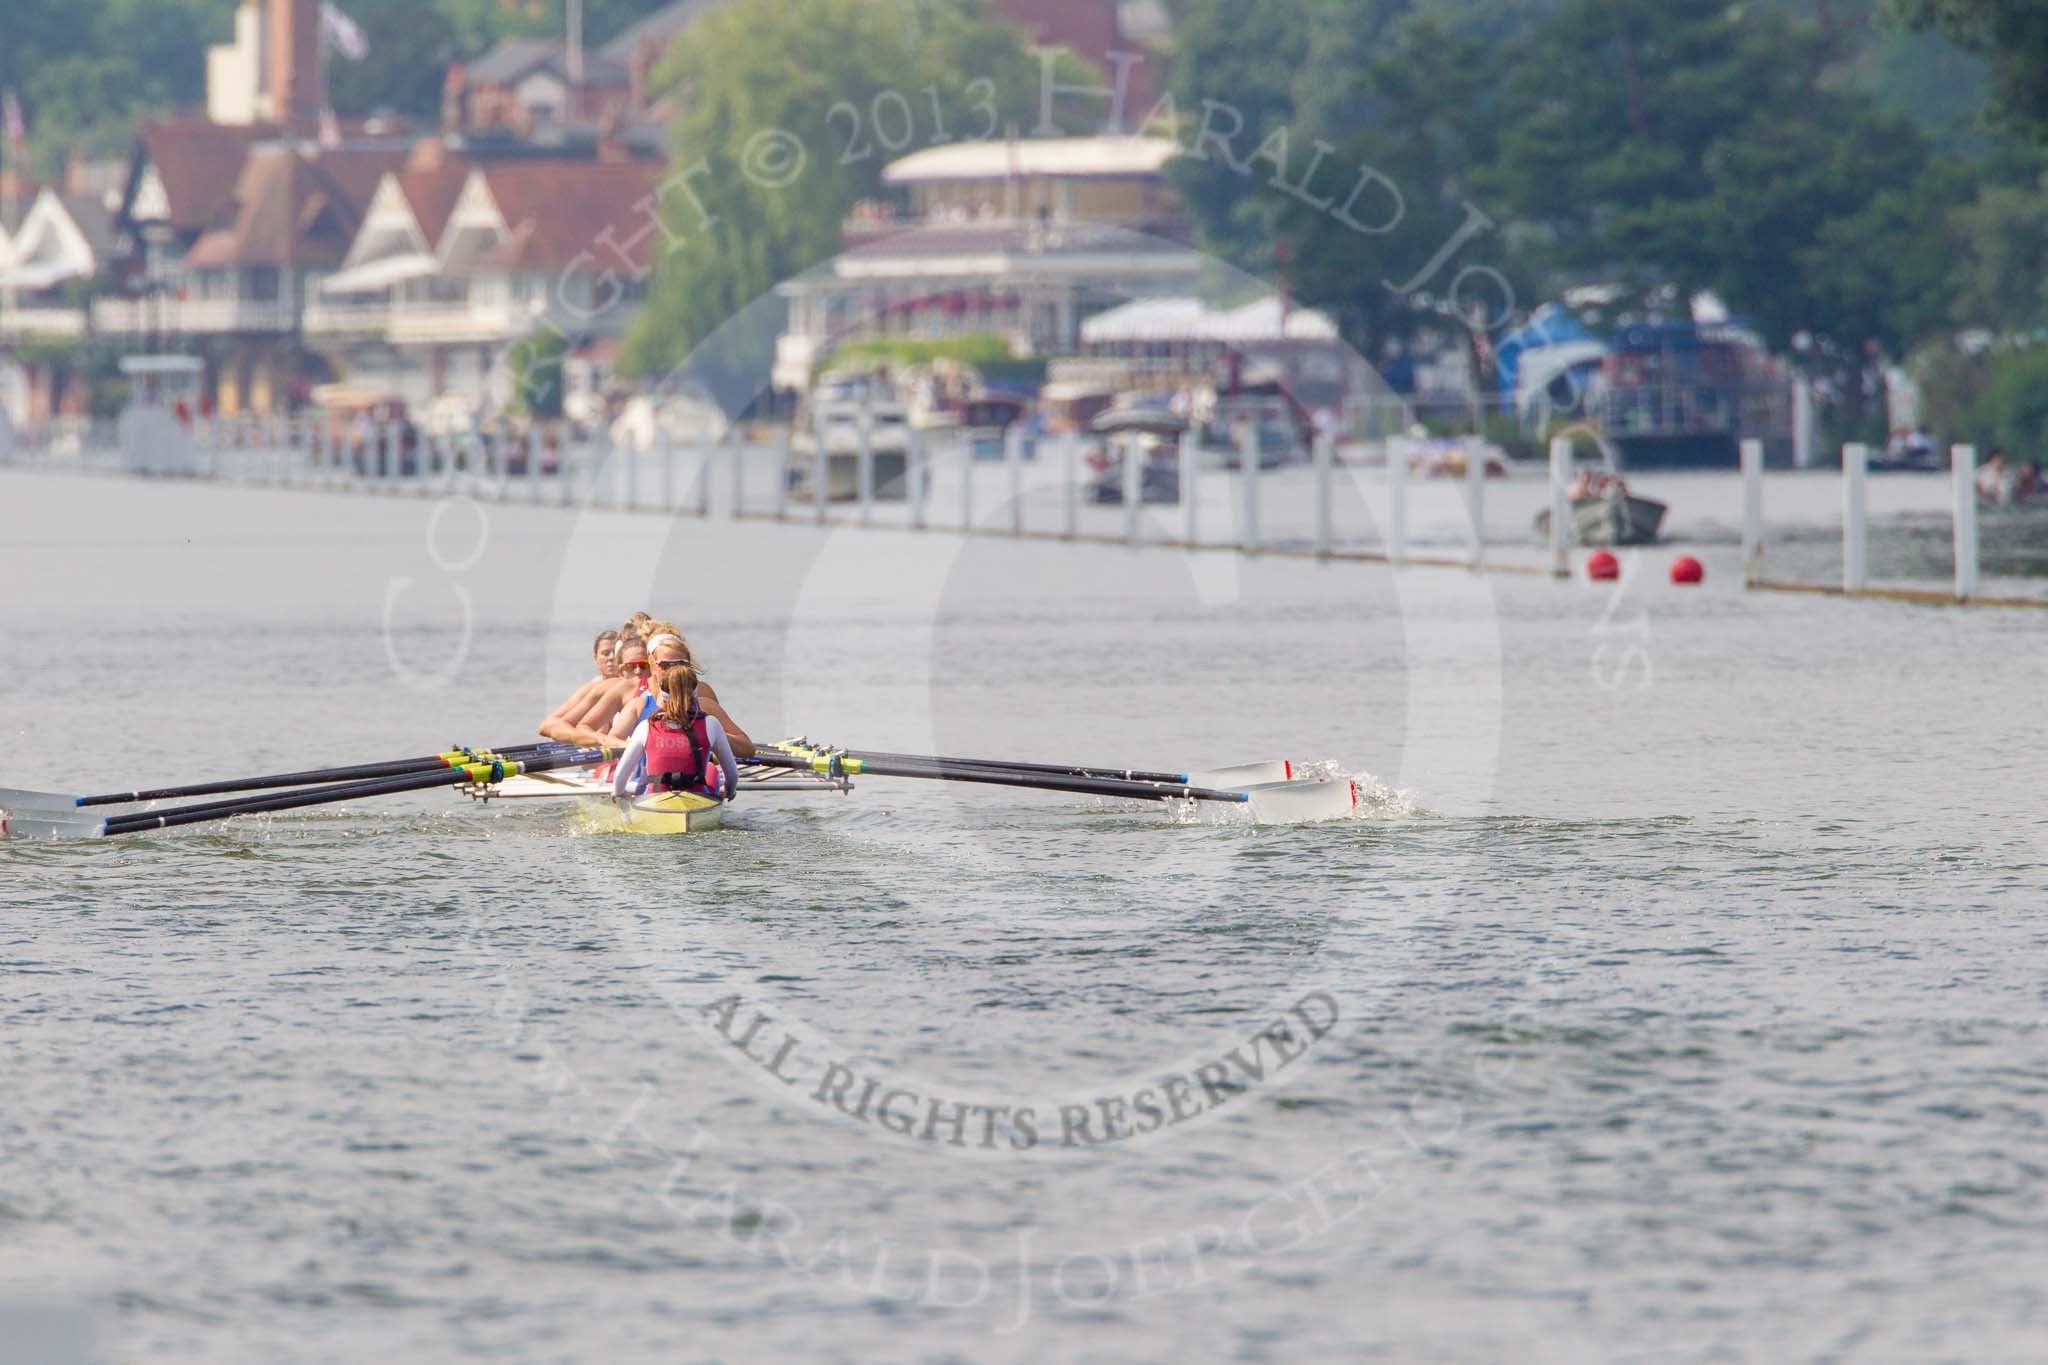 Henley Royal Regatta 2013, Saturday: Race No. 4 for the Remenham Challenge Cup, Molesey Boat Club v Tees Rowing Club and Agecroft Rowing Club. Image #147, 06 July 2013 10:43 River Thames, Henley on Thames, UK